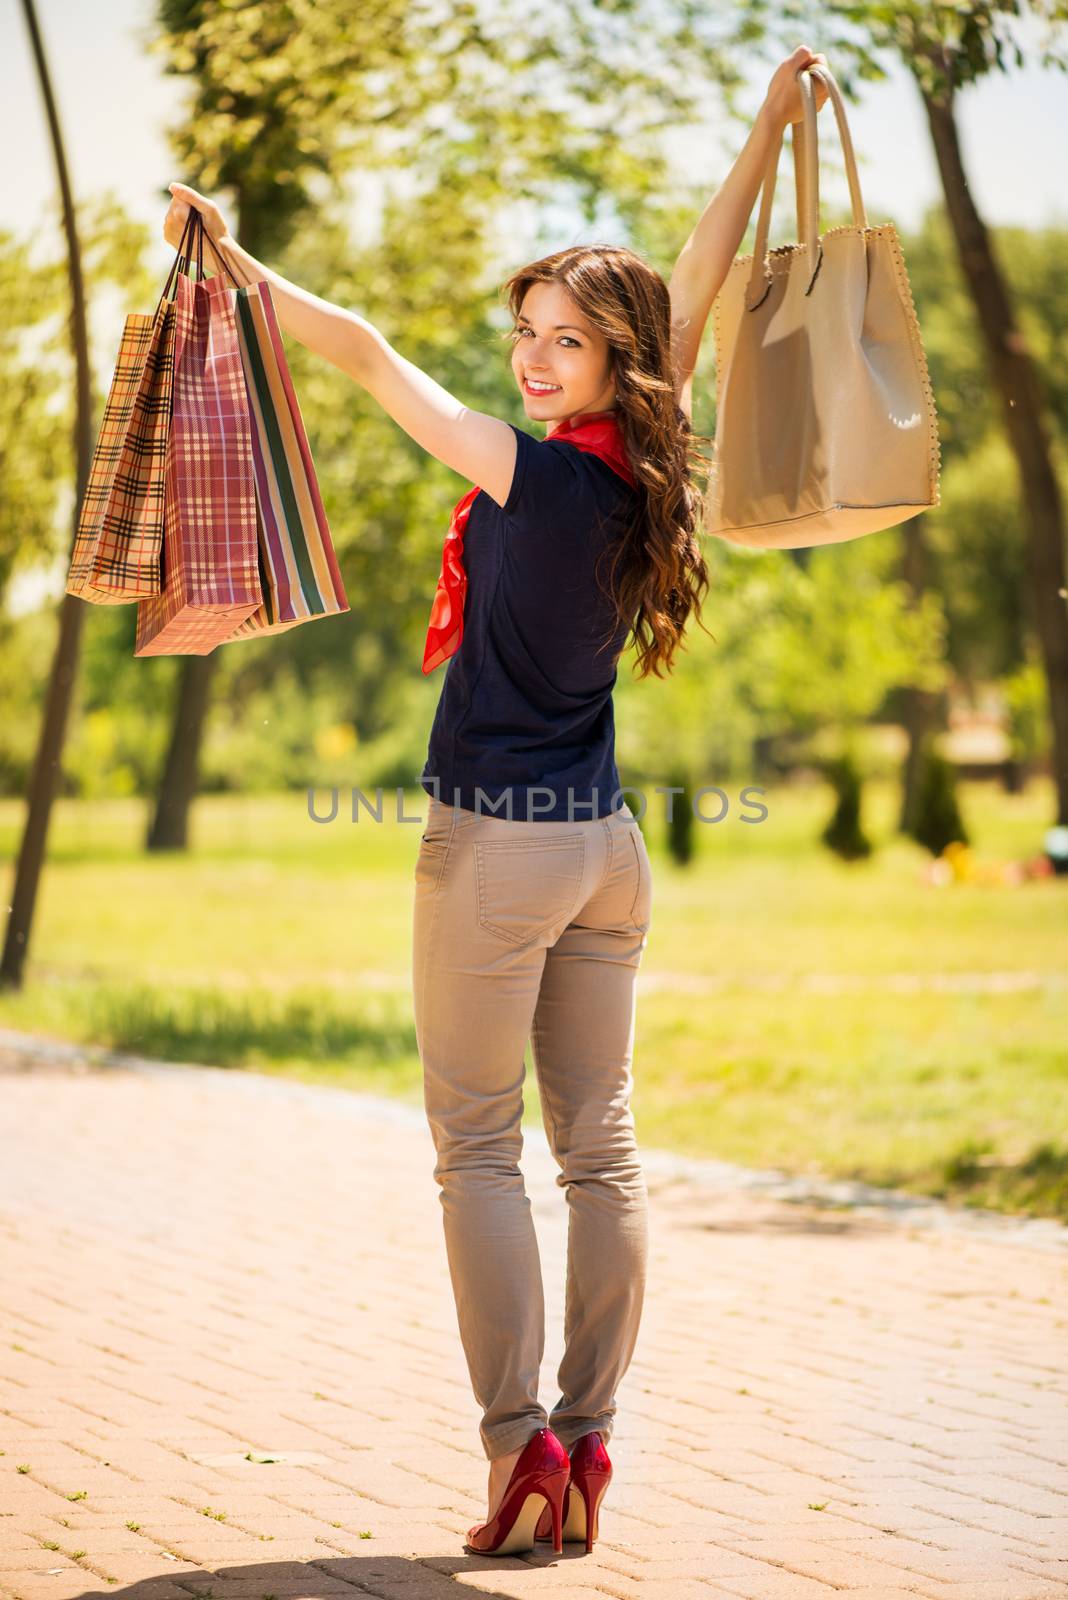 Happy Girl With Shopping Bags by MilanMarkovic78